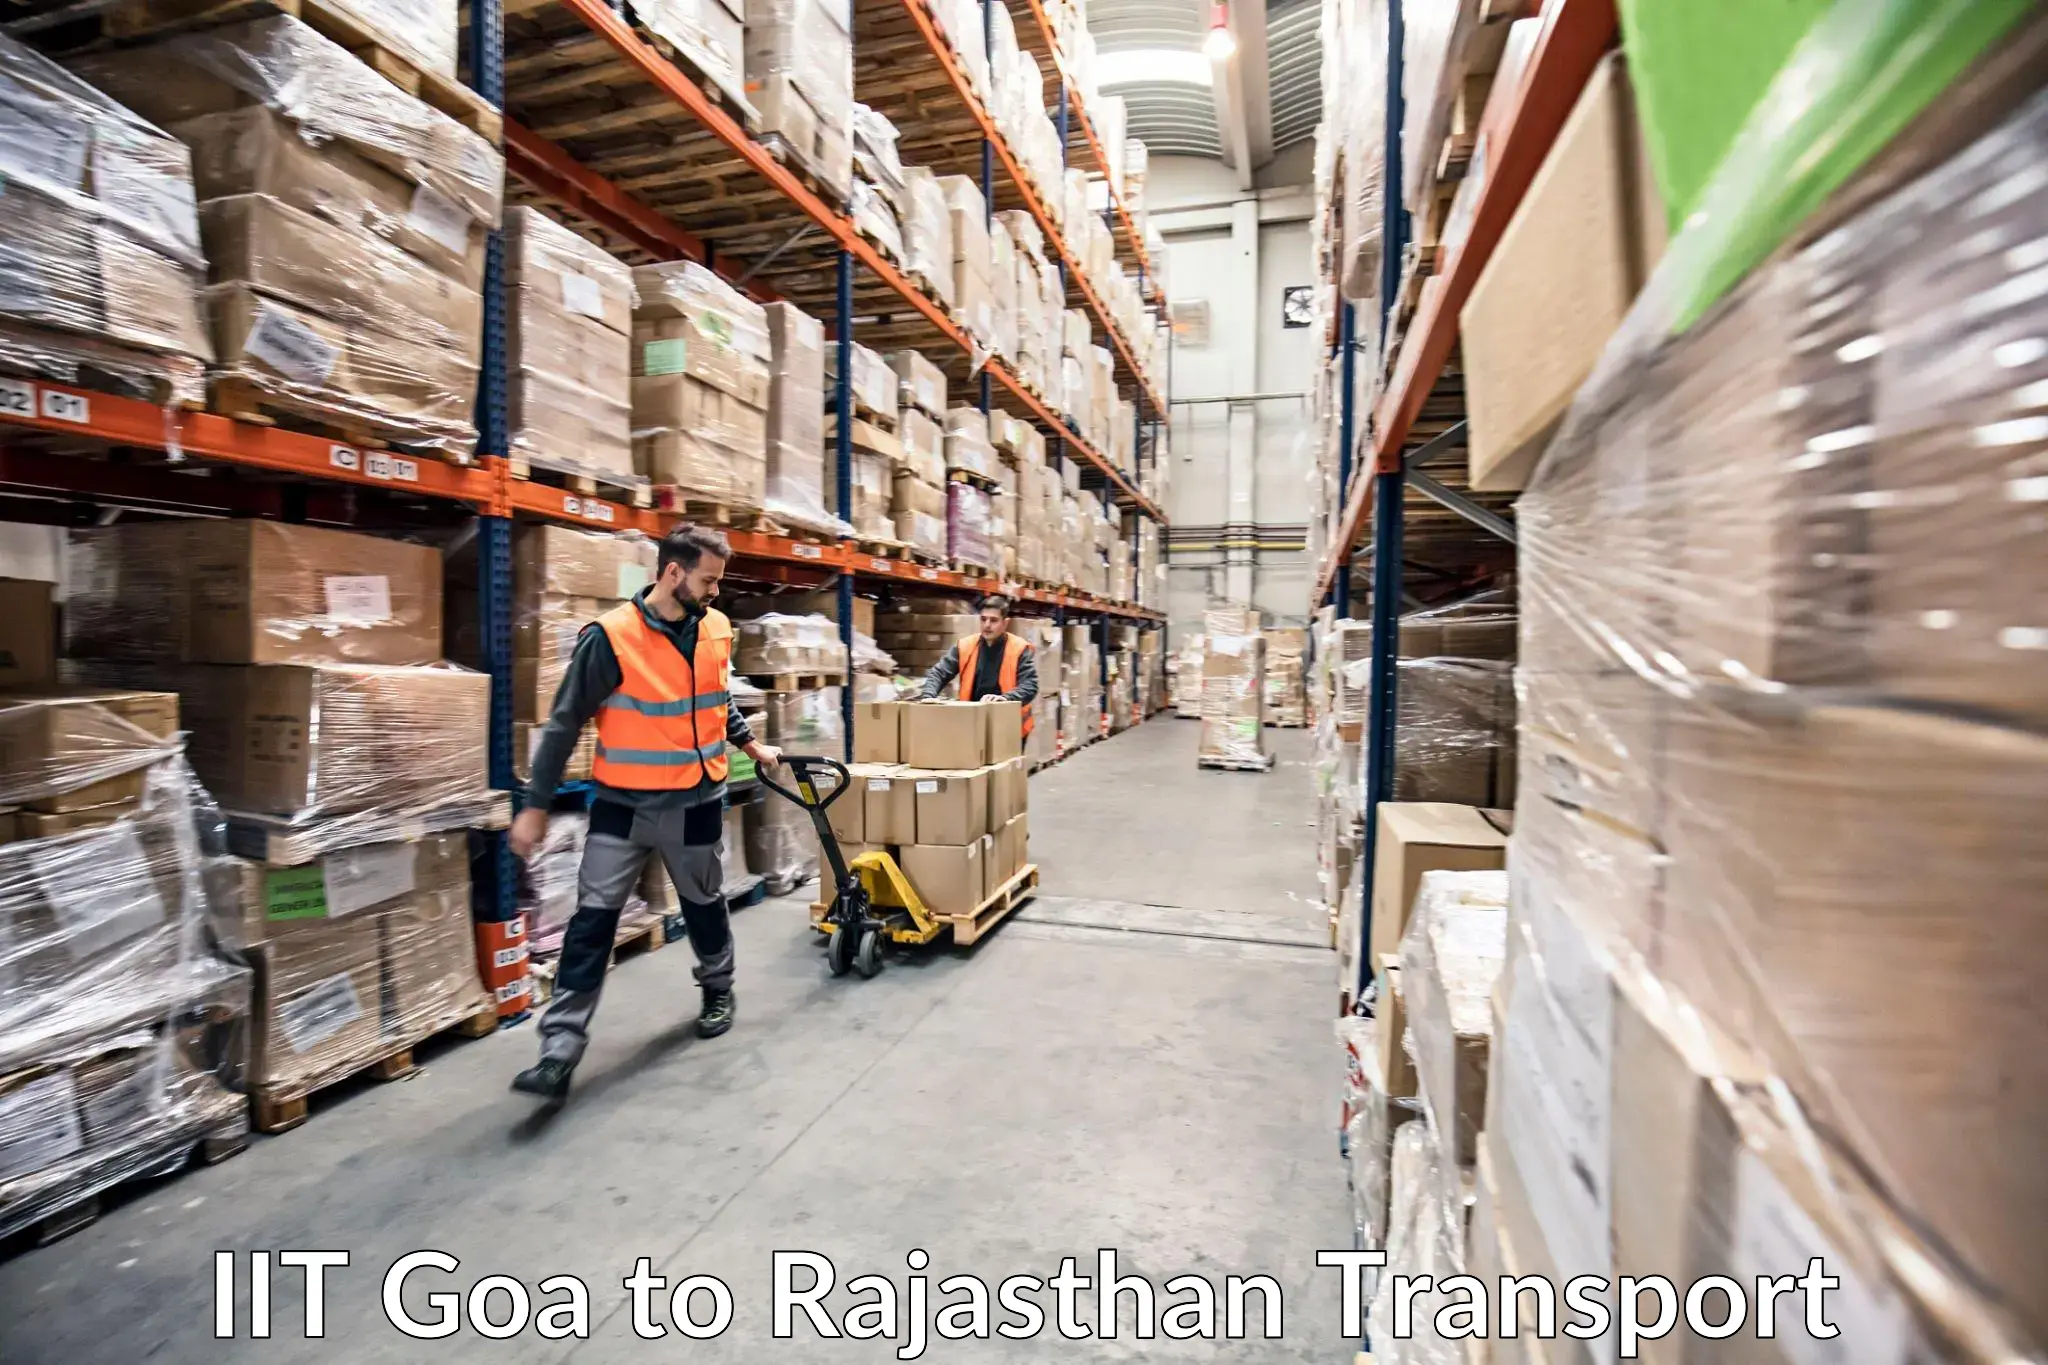 Goods delivery service IIT Goa to Kawai